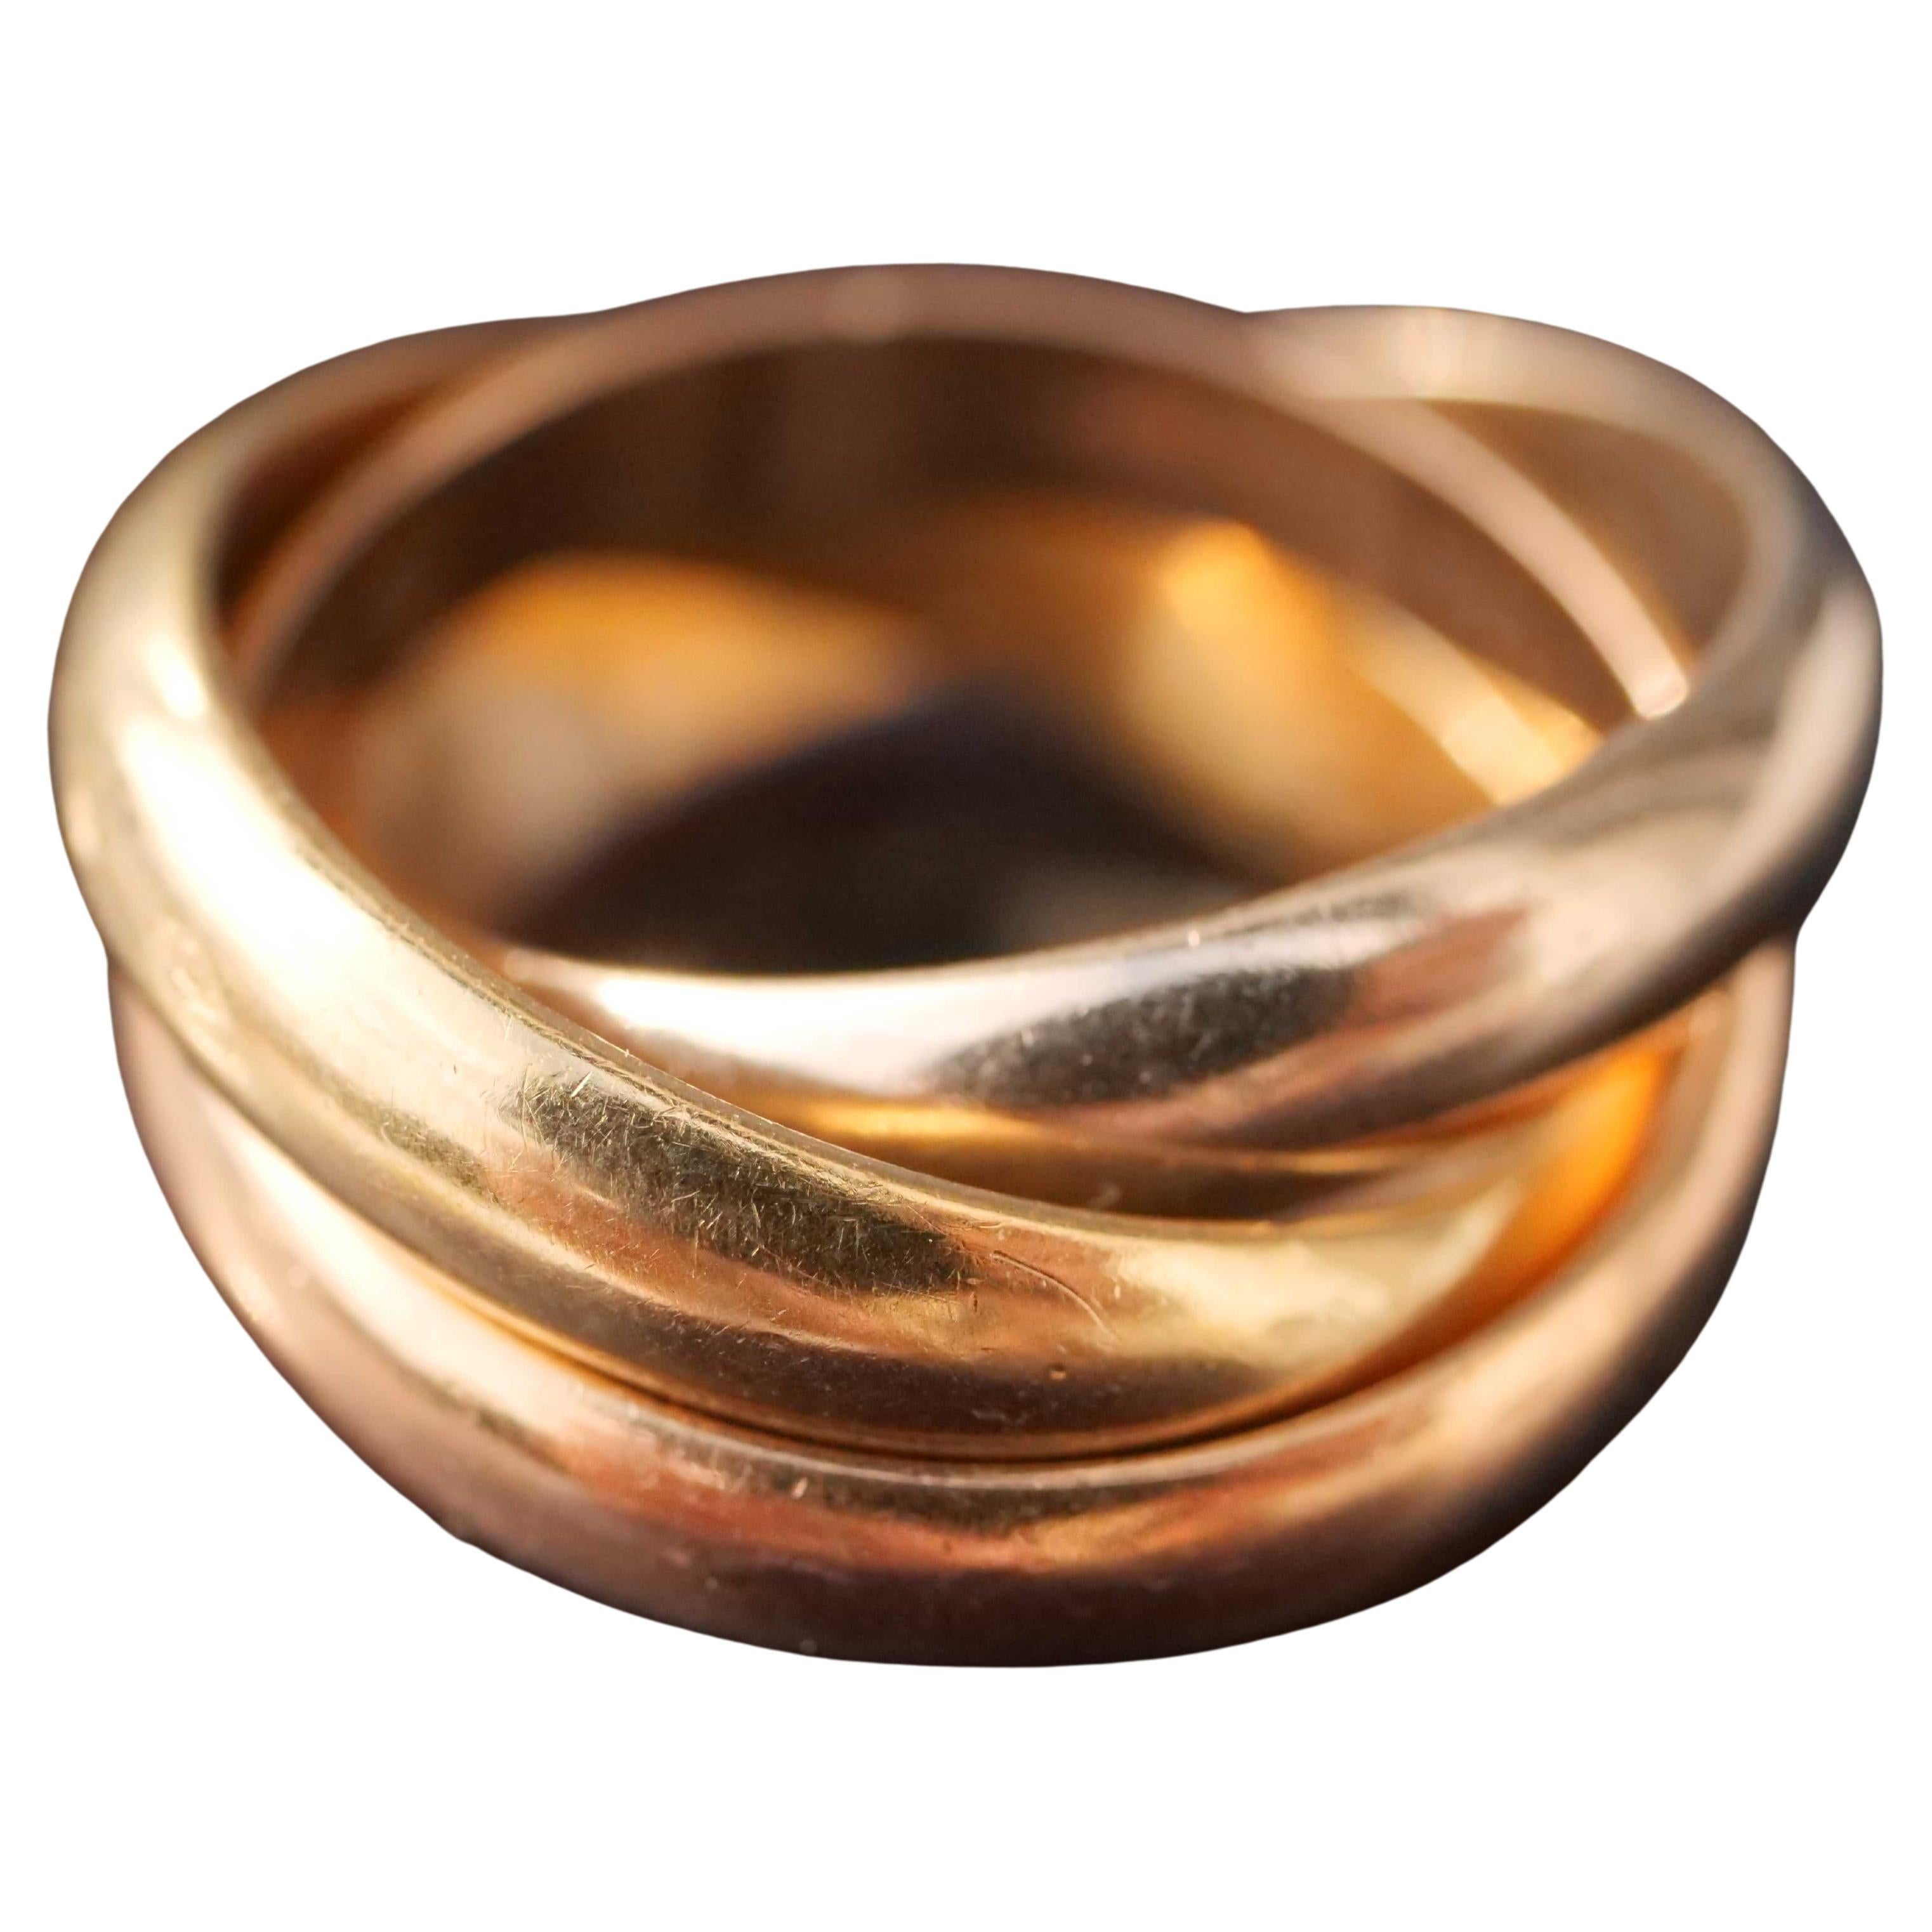 Original Cartier Ring Trinity in 750 white gold yellow gold rose gold, triple intertwined band ring, approx. 11.25 grams heavy, timeless design, inside there are the original hallmarks P2368B, ring width 51 (16.2 mm), width 4 mm height, Worn